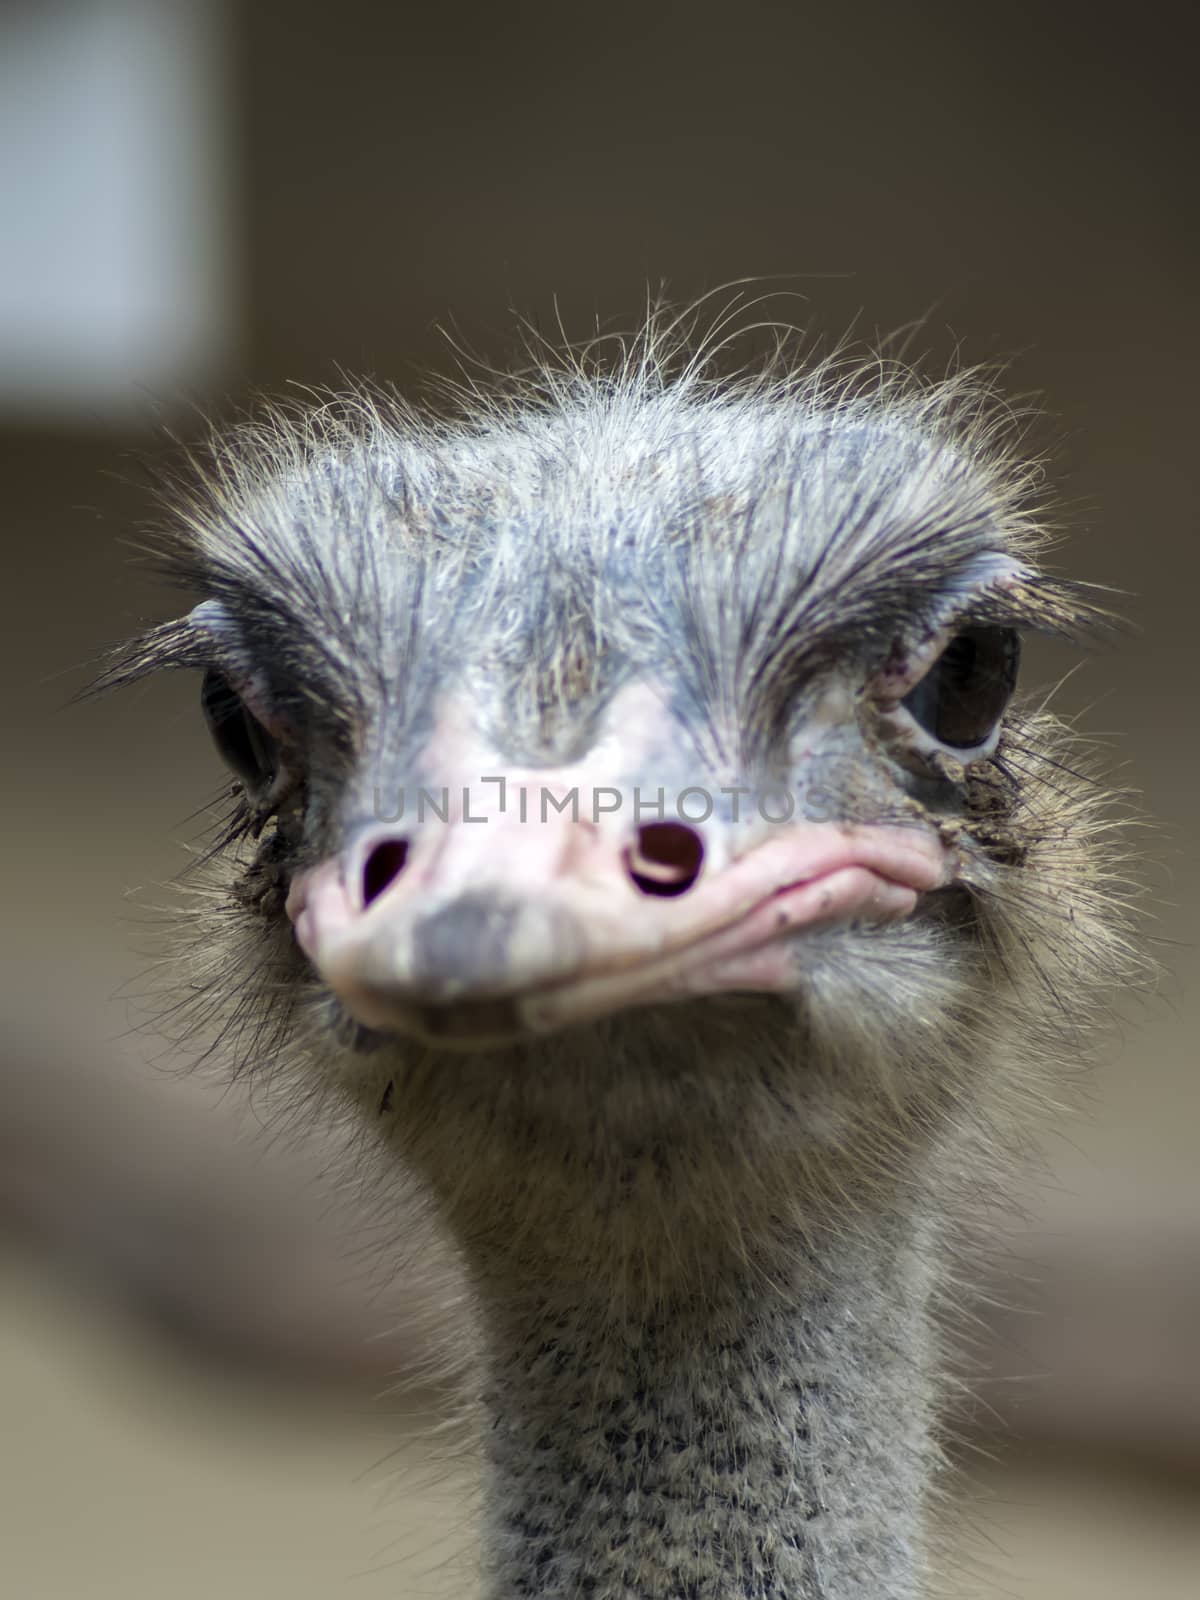 Common Ostrich View. Struthio Camelus is either one or two species of large flightless birds native to Africa.